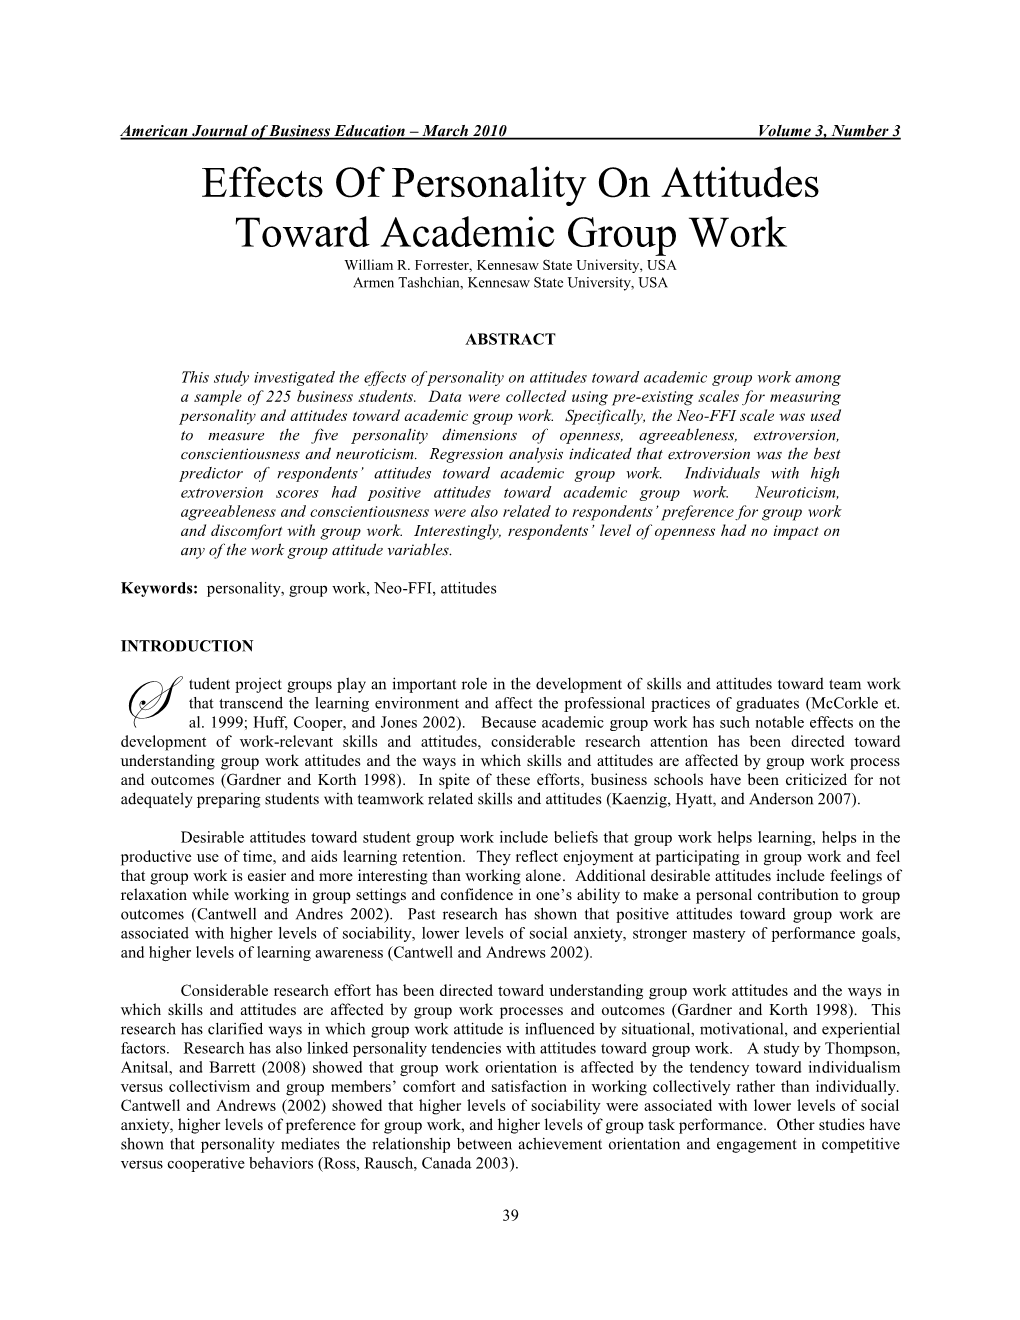 Effects of Personality on Attitudes Toward Academic Group Work William R